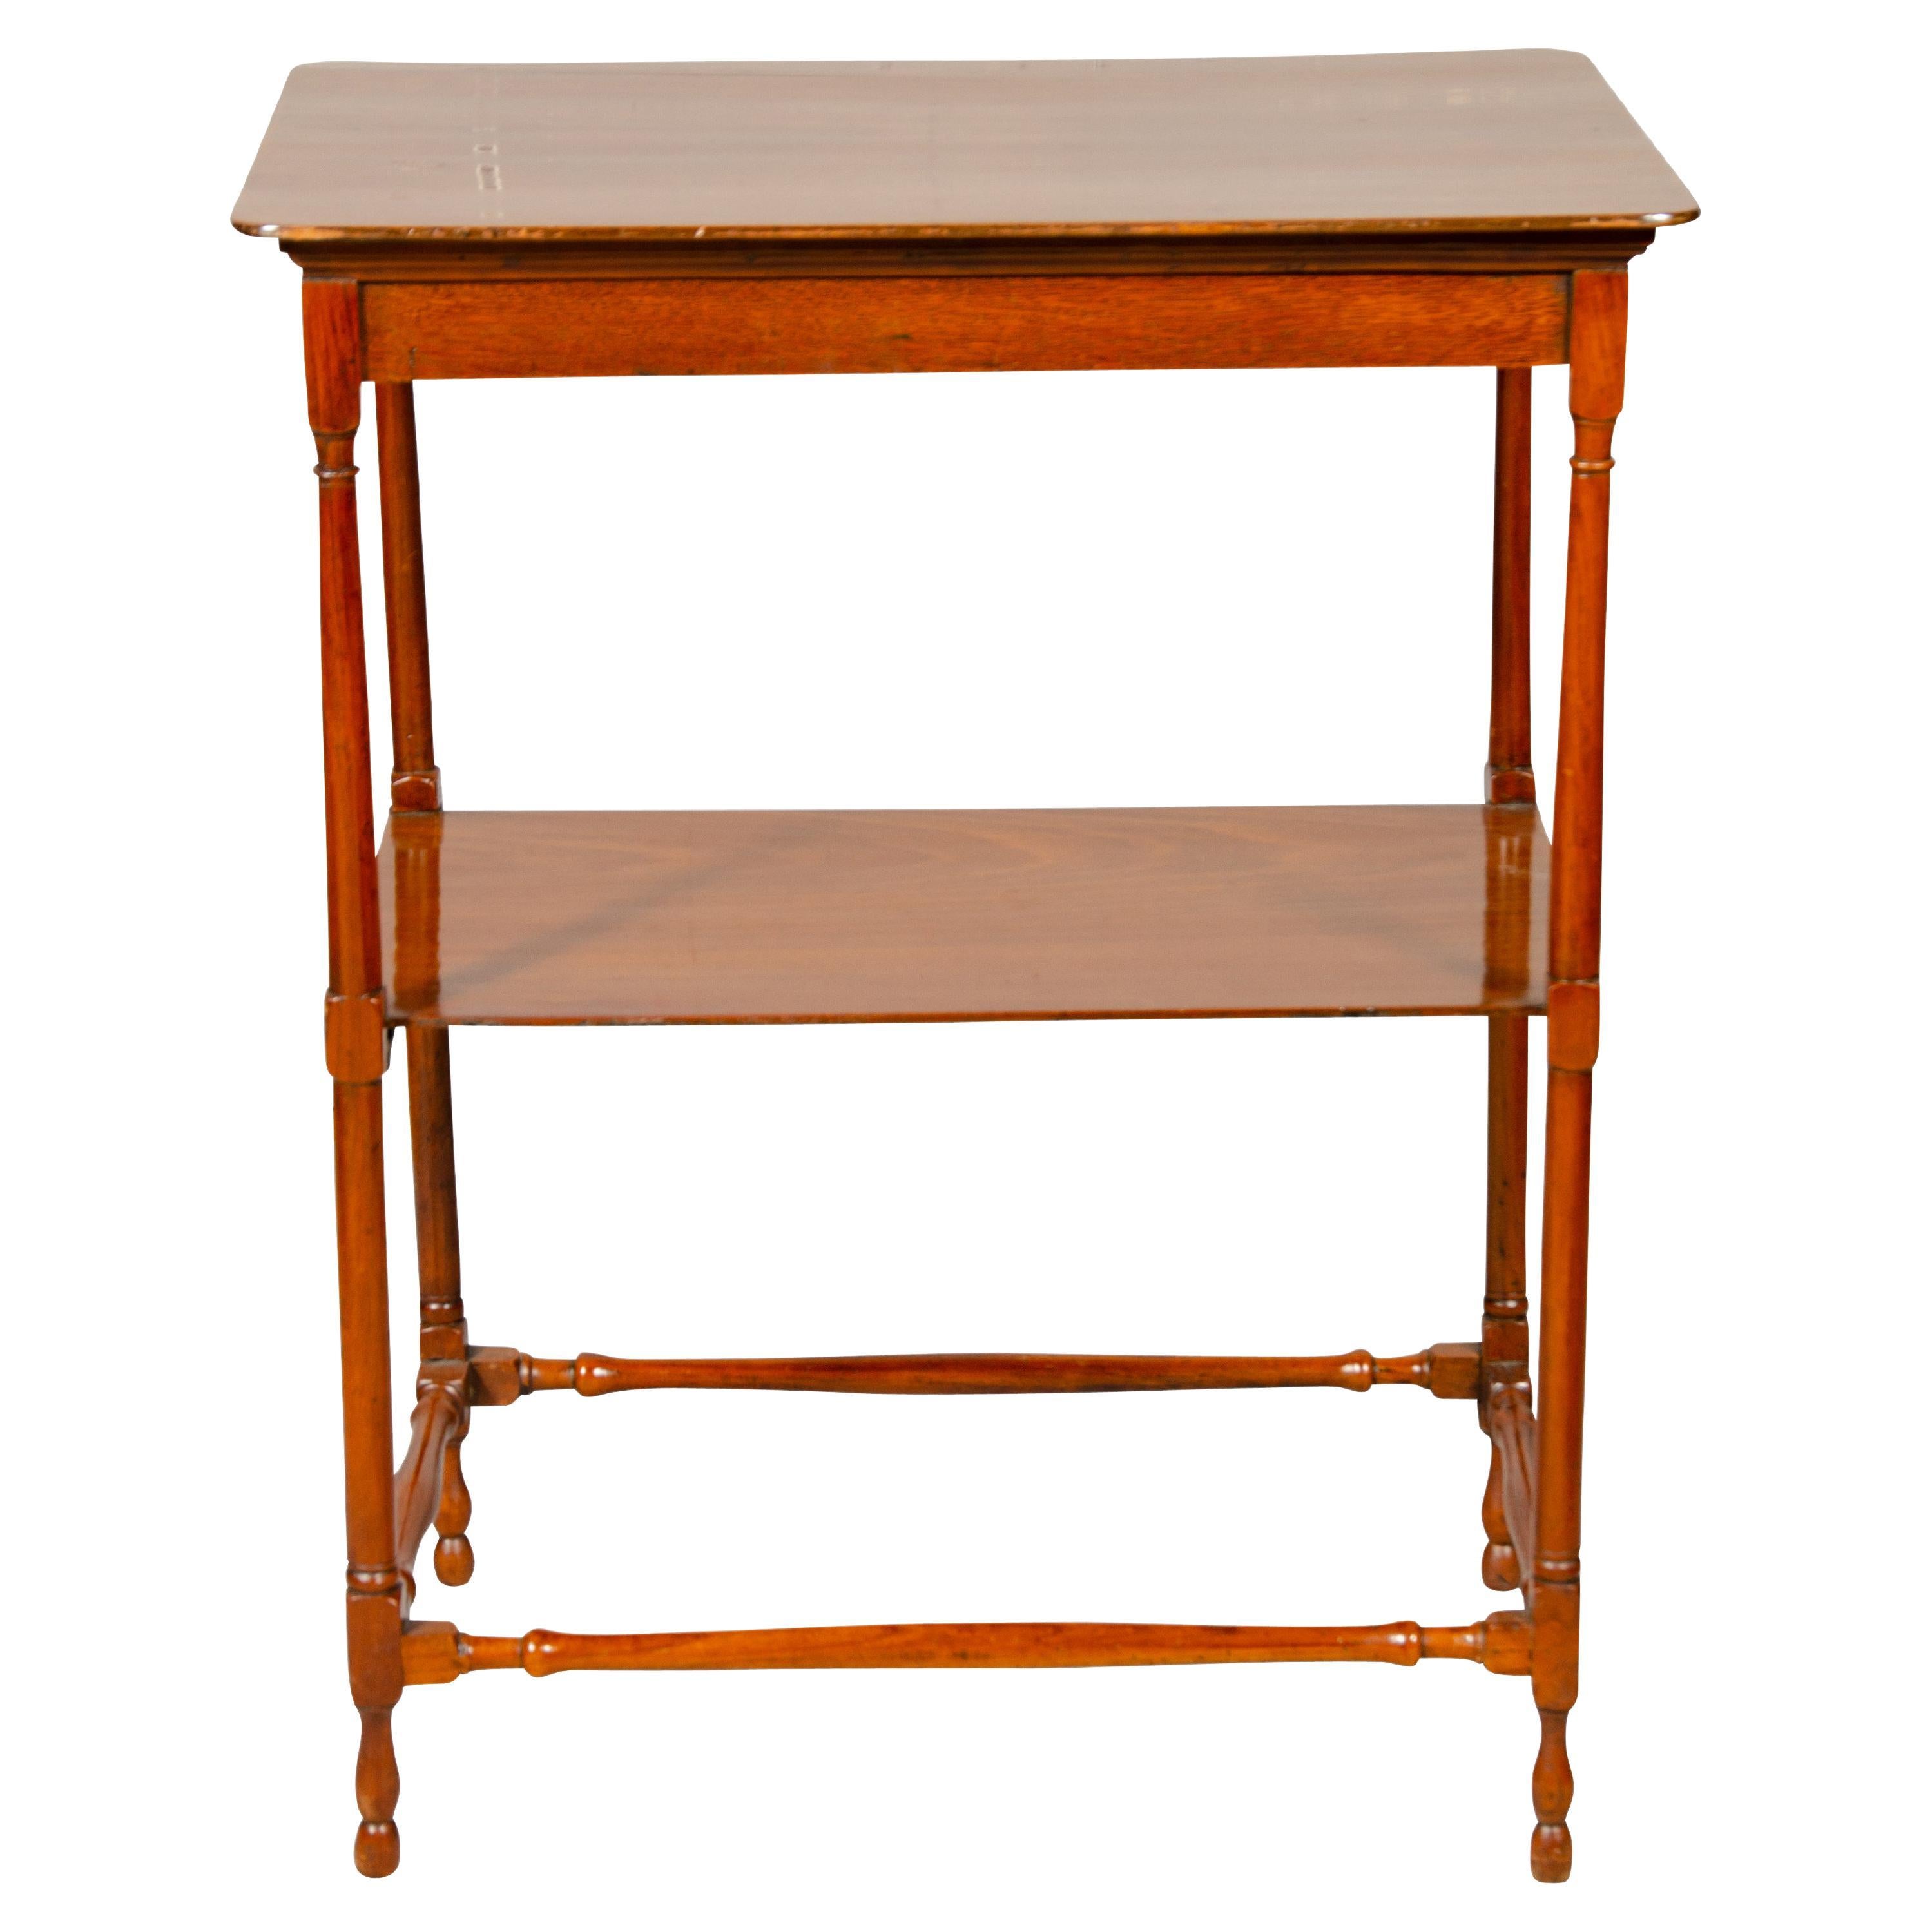 Rectangular top with conforming lower shelf, spindle legs and stretchers.